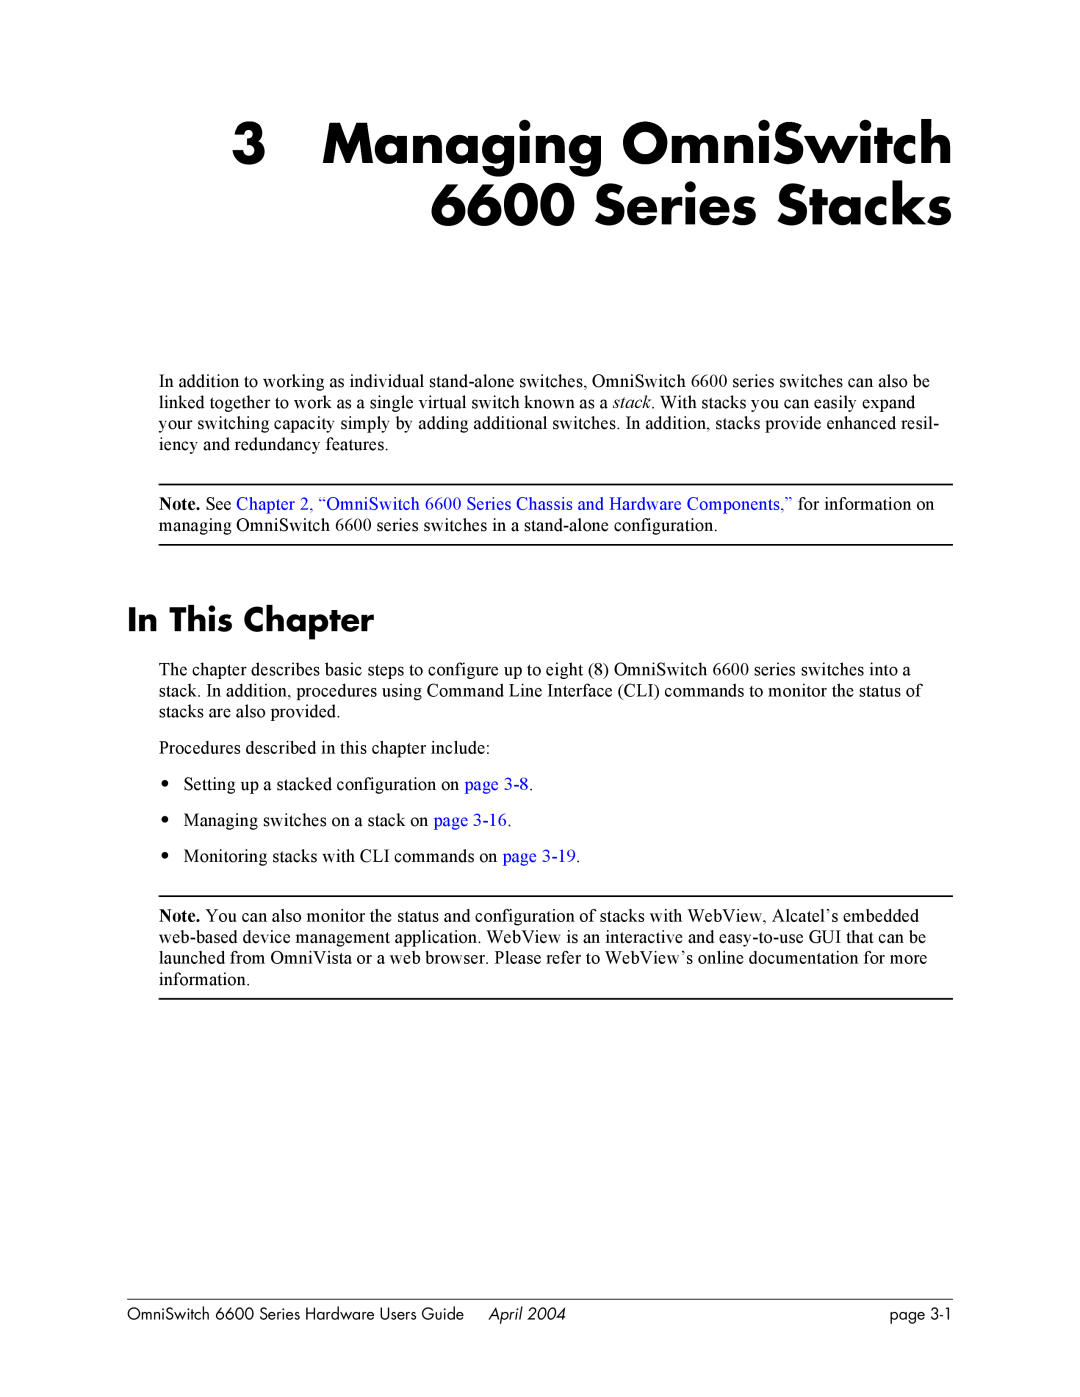 Alcatel-Lucent 6648, 6624 manual Managing OmniSwitch 6600 Series Stacks, In This Chapter 